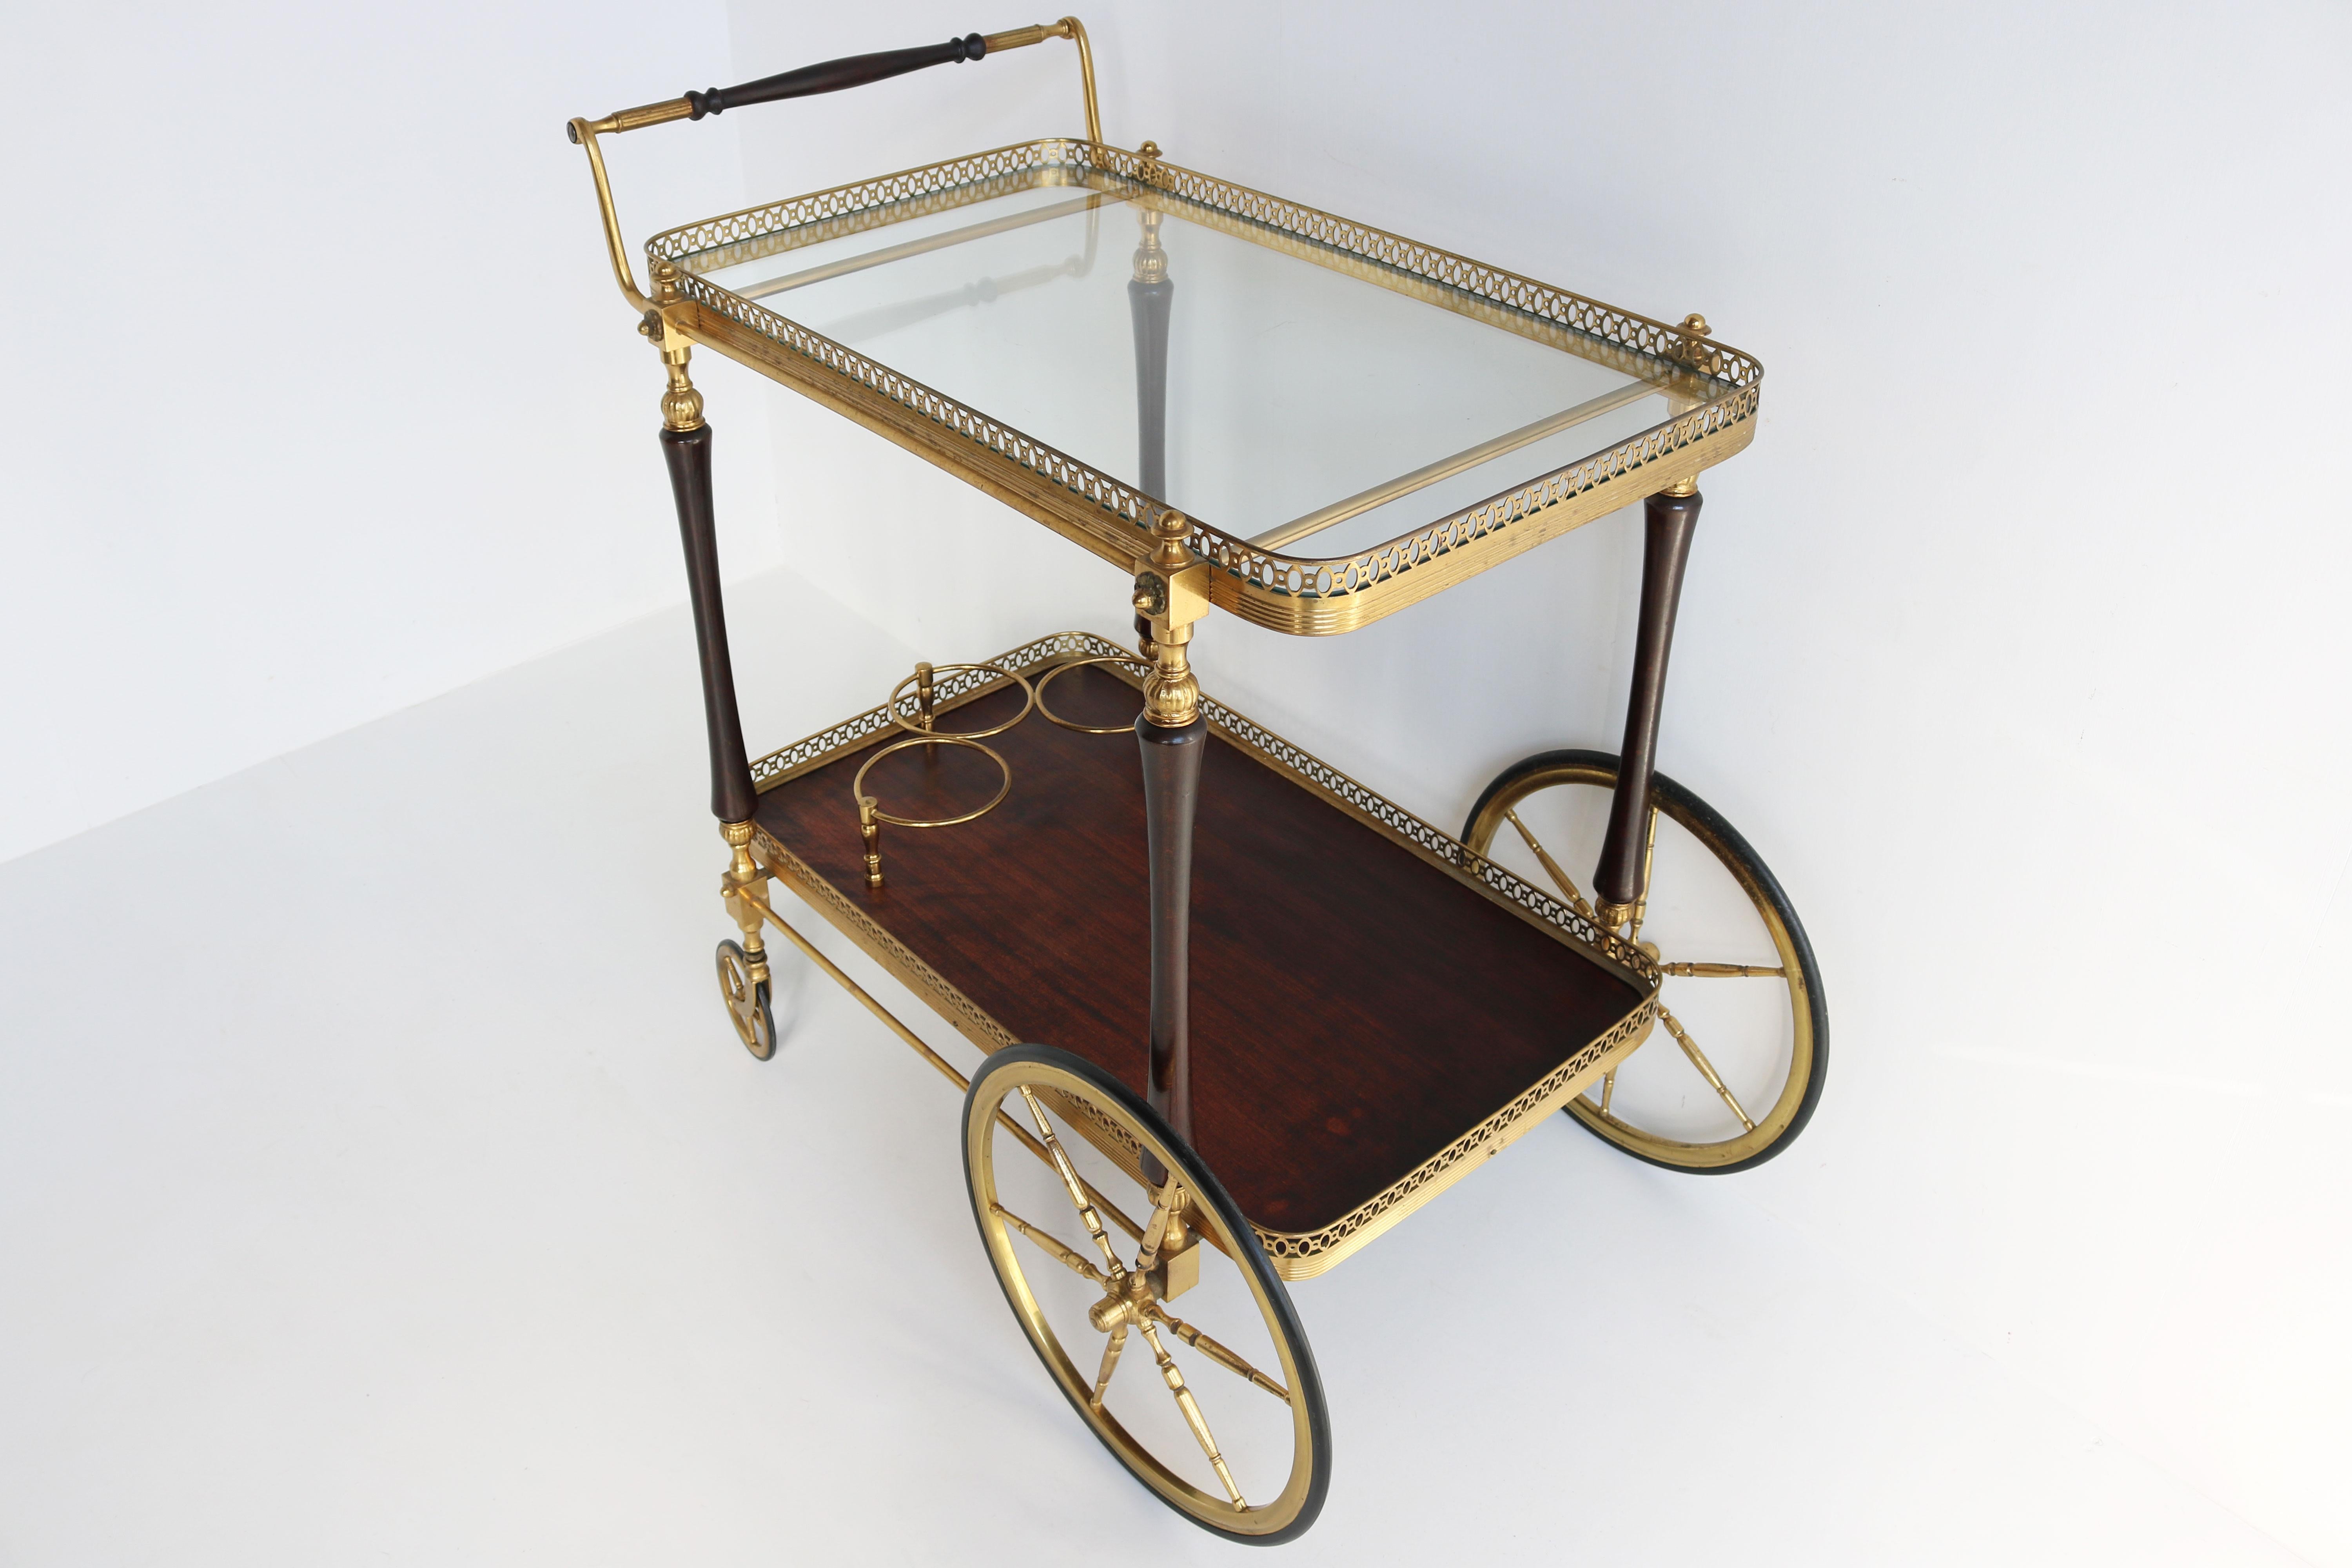 Hollywood Regency French Design Bar Cart by Maison Bagues 1950 Brass Glass Wood Serving Trolley